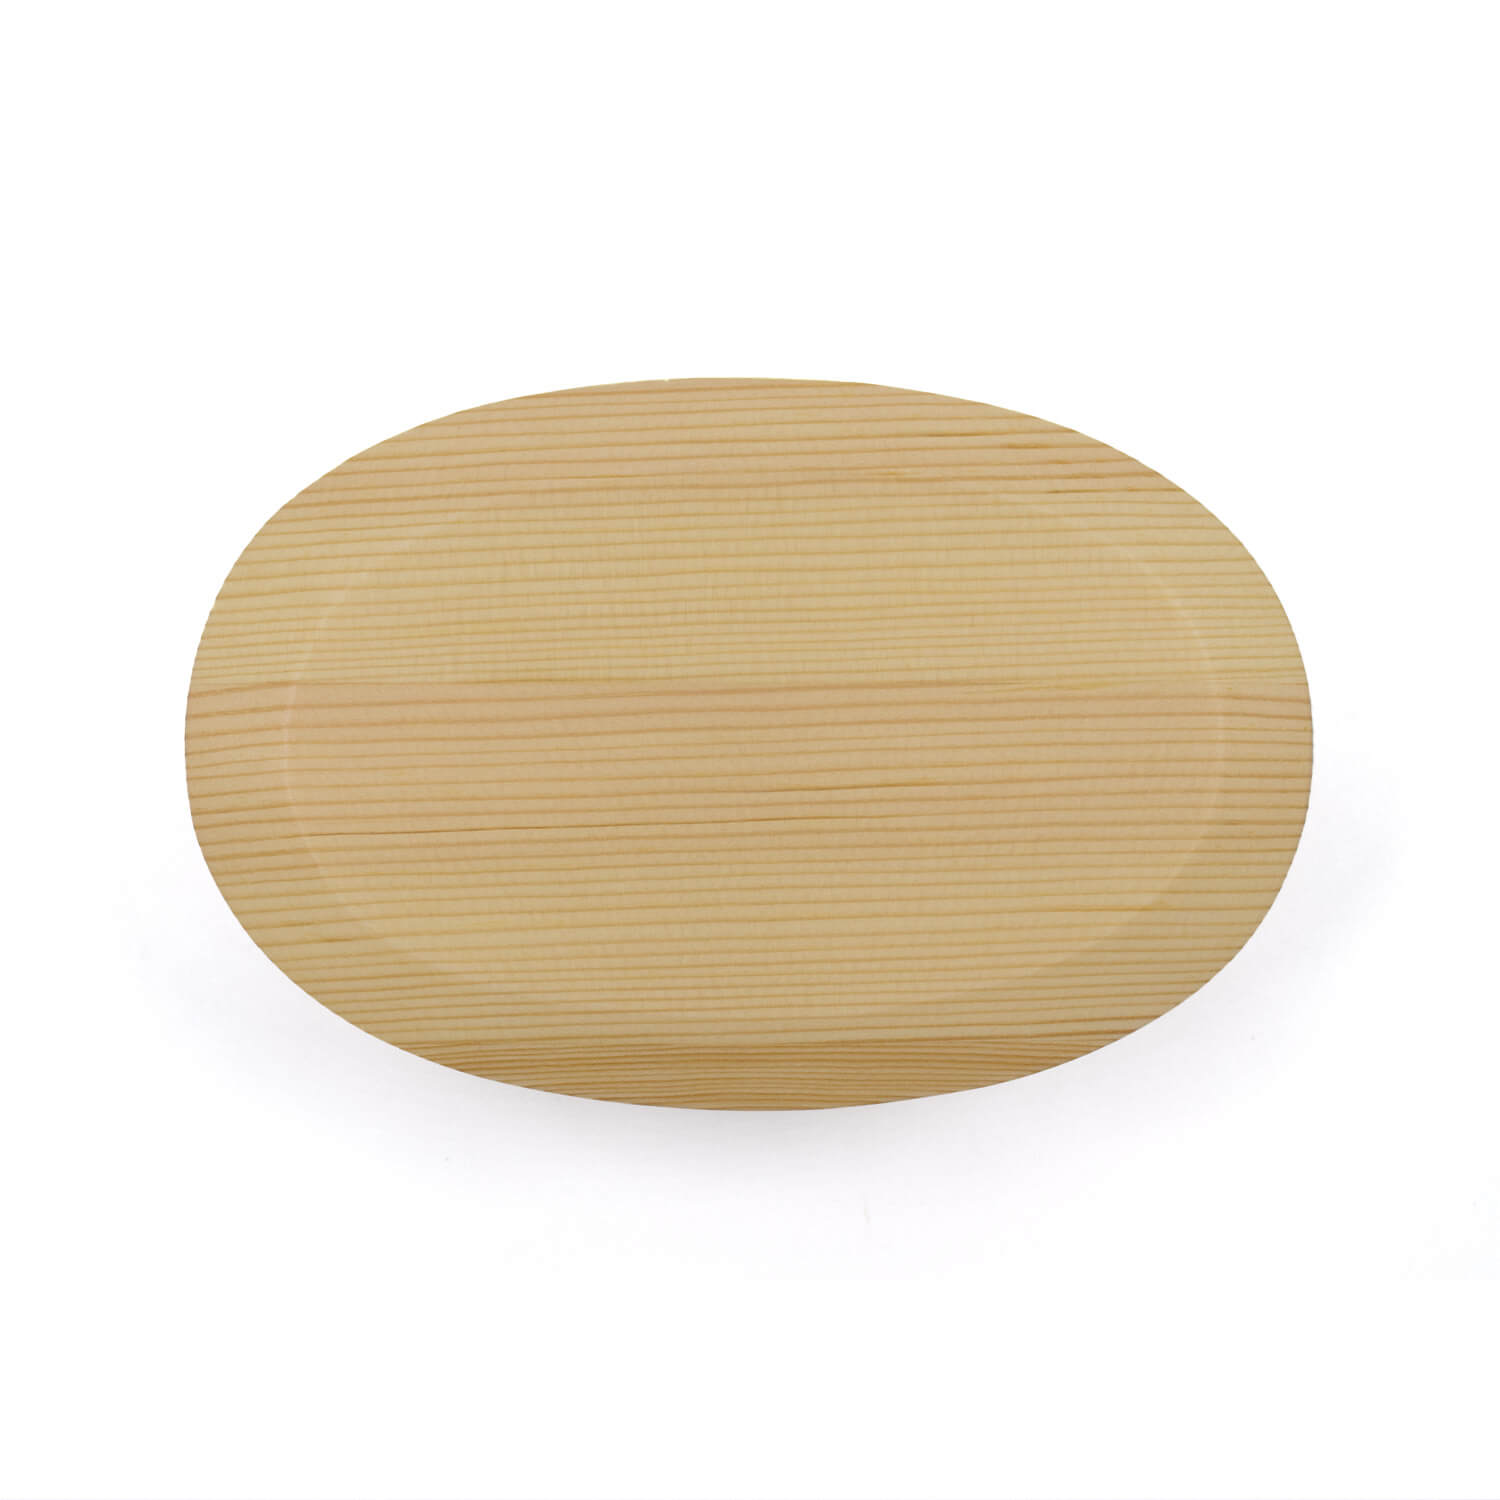 Cover type oval one tier small 500ml magewappa bento box